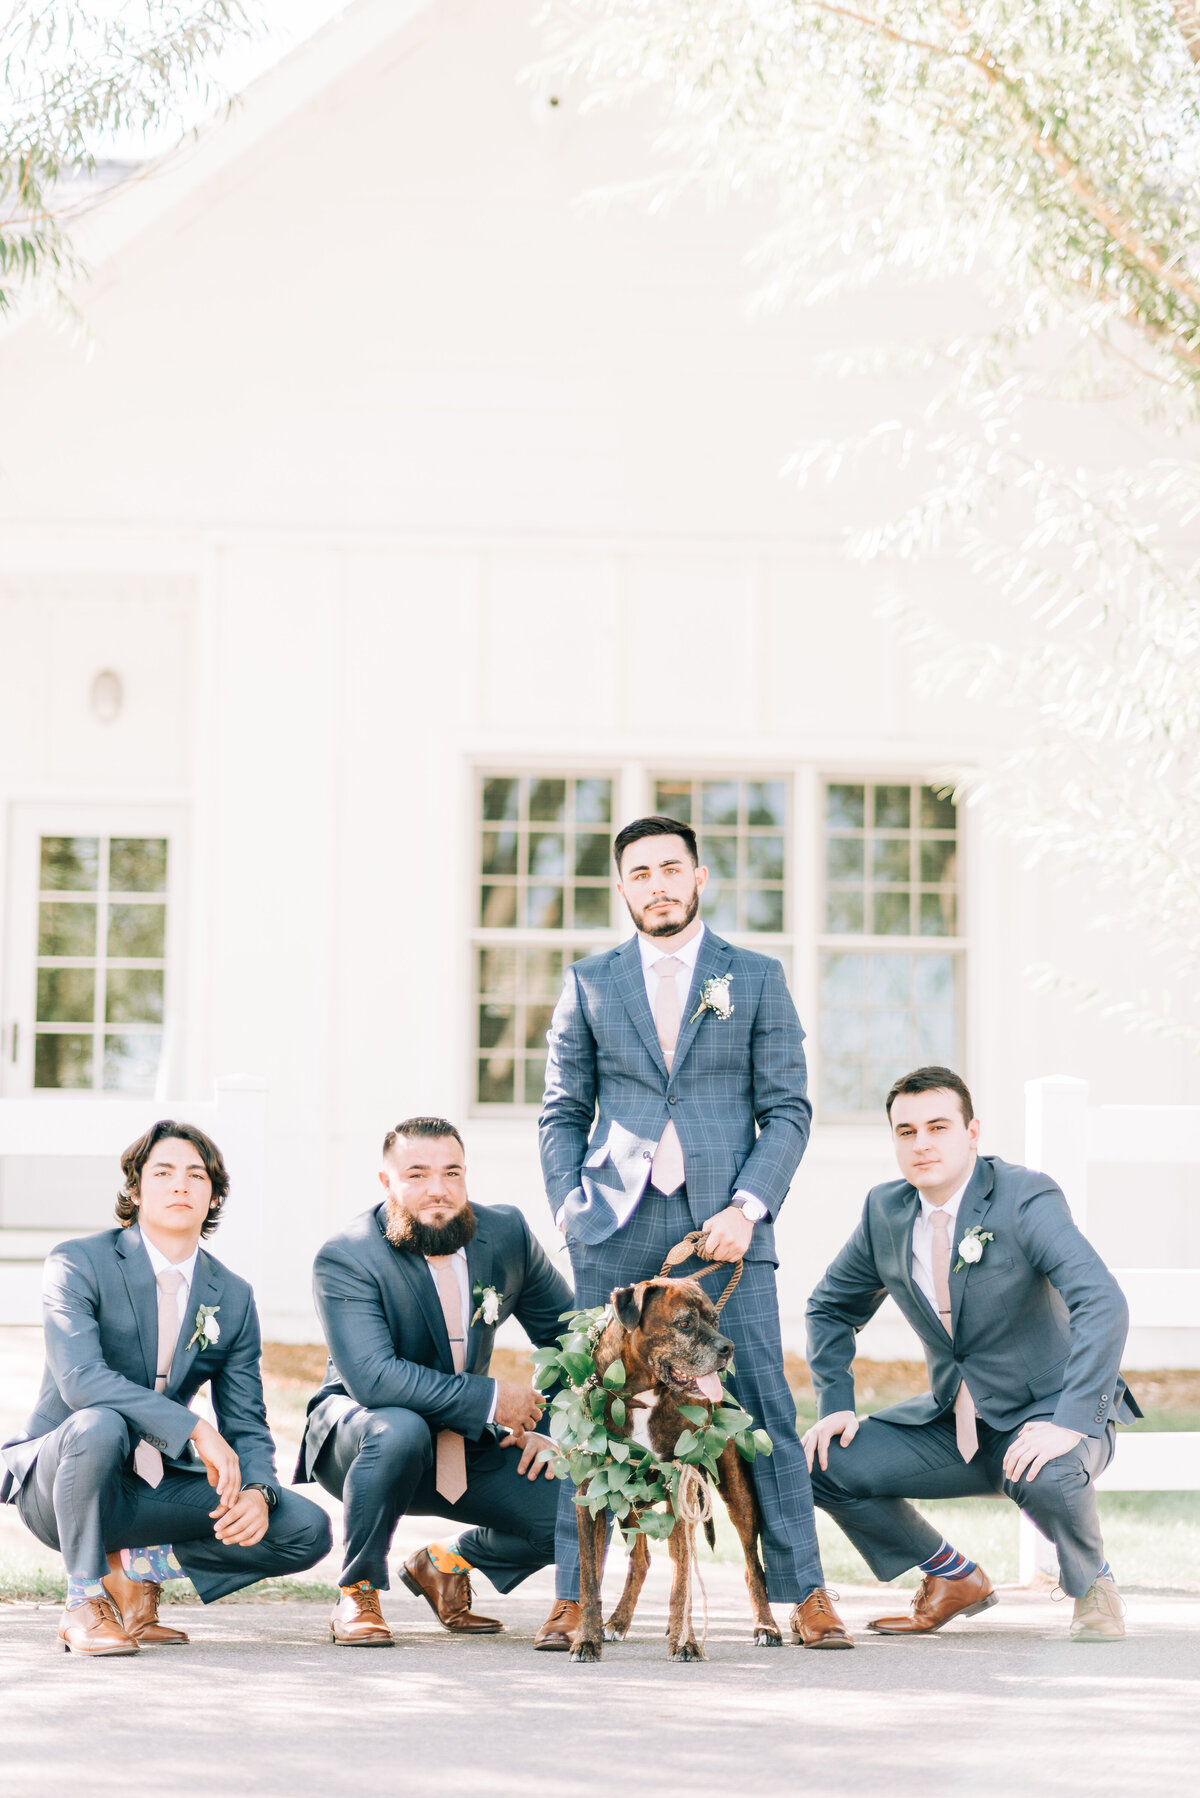 groom and groomsmen on wedding day with dog who is ring bearer